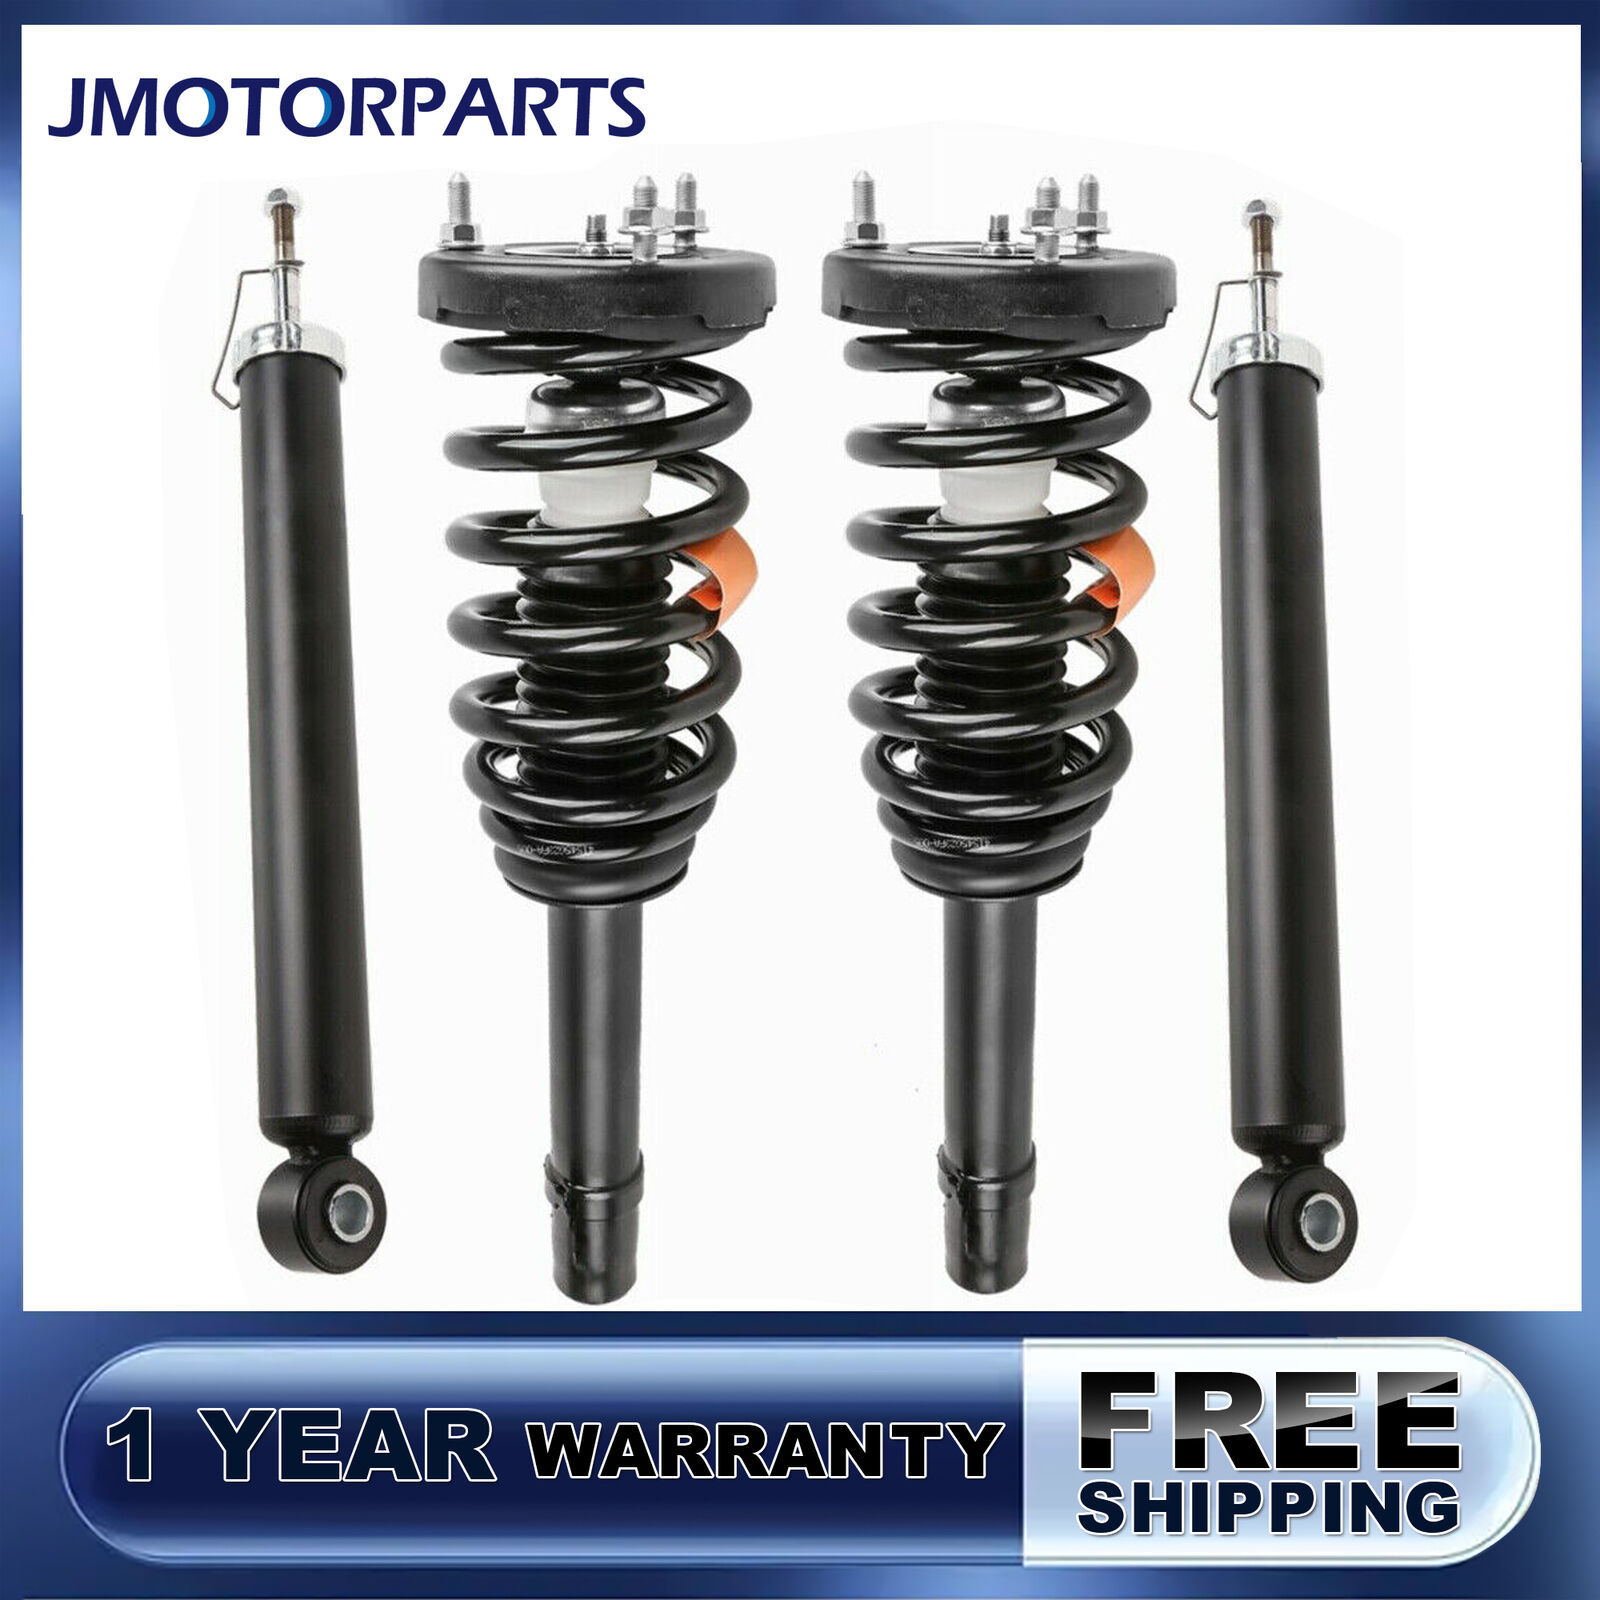 2 Front Complete Struts + 2 Rear Shock Absorbers For Hyundai Sonata 2006-2010